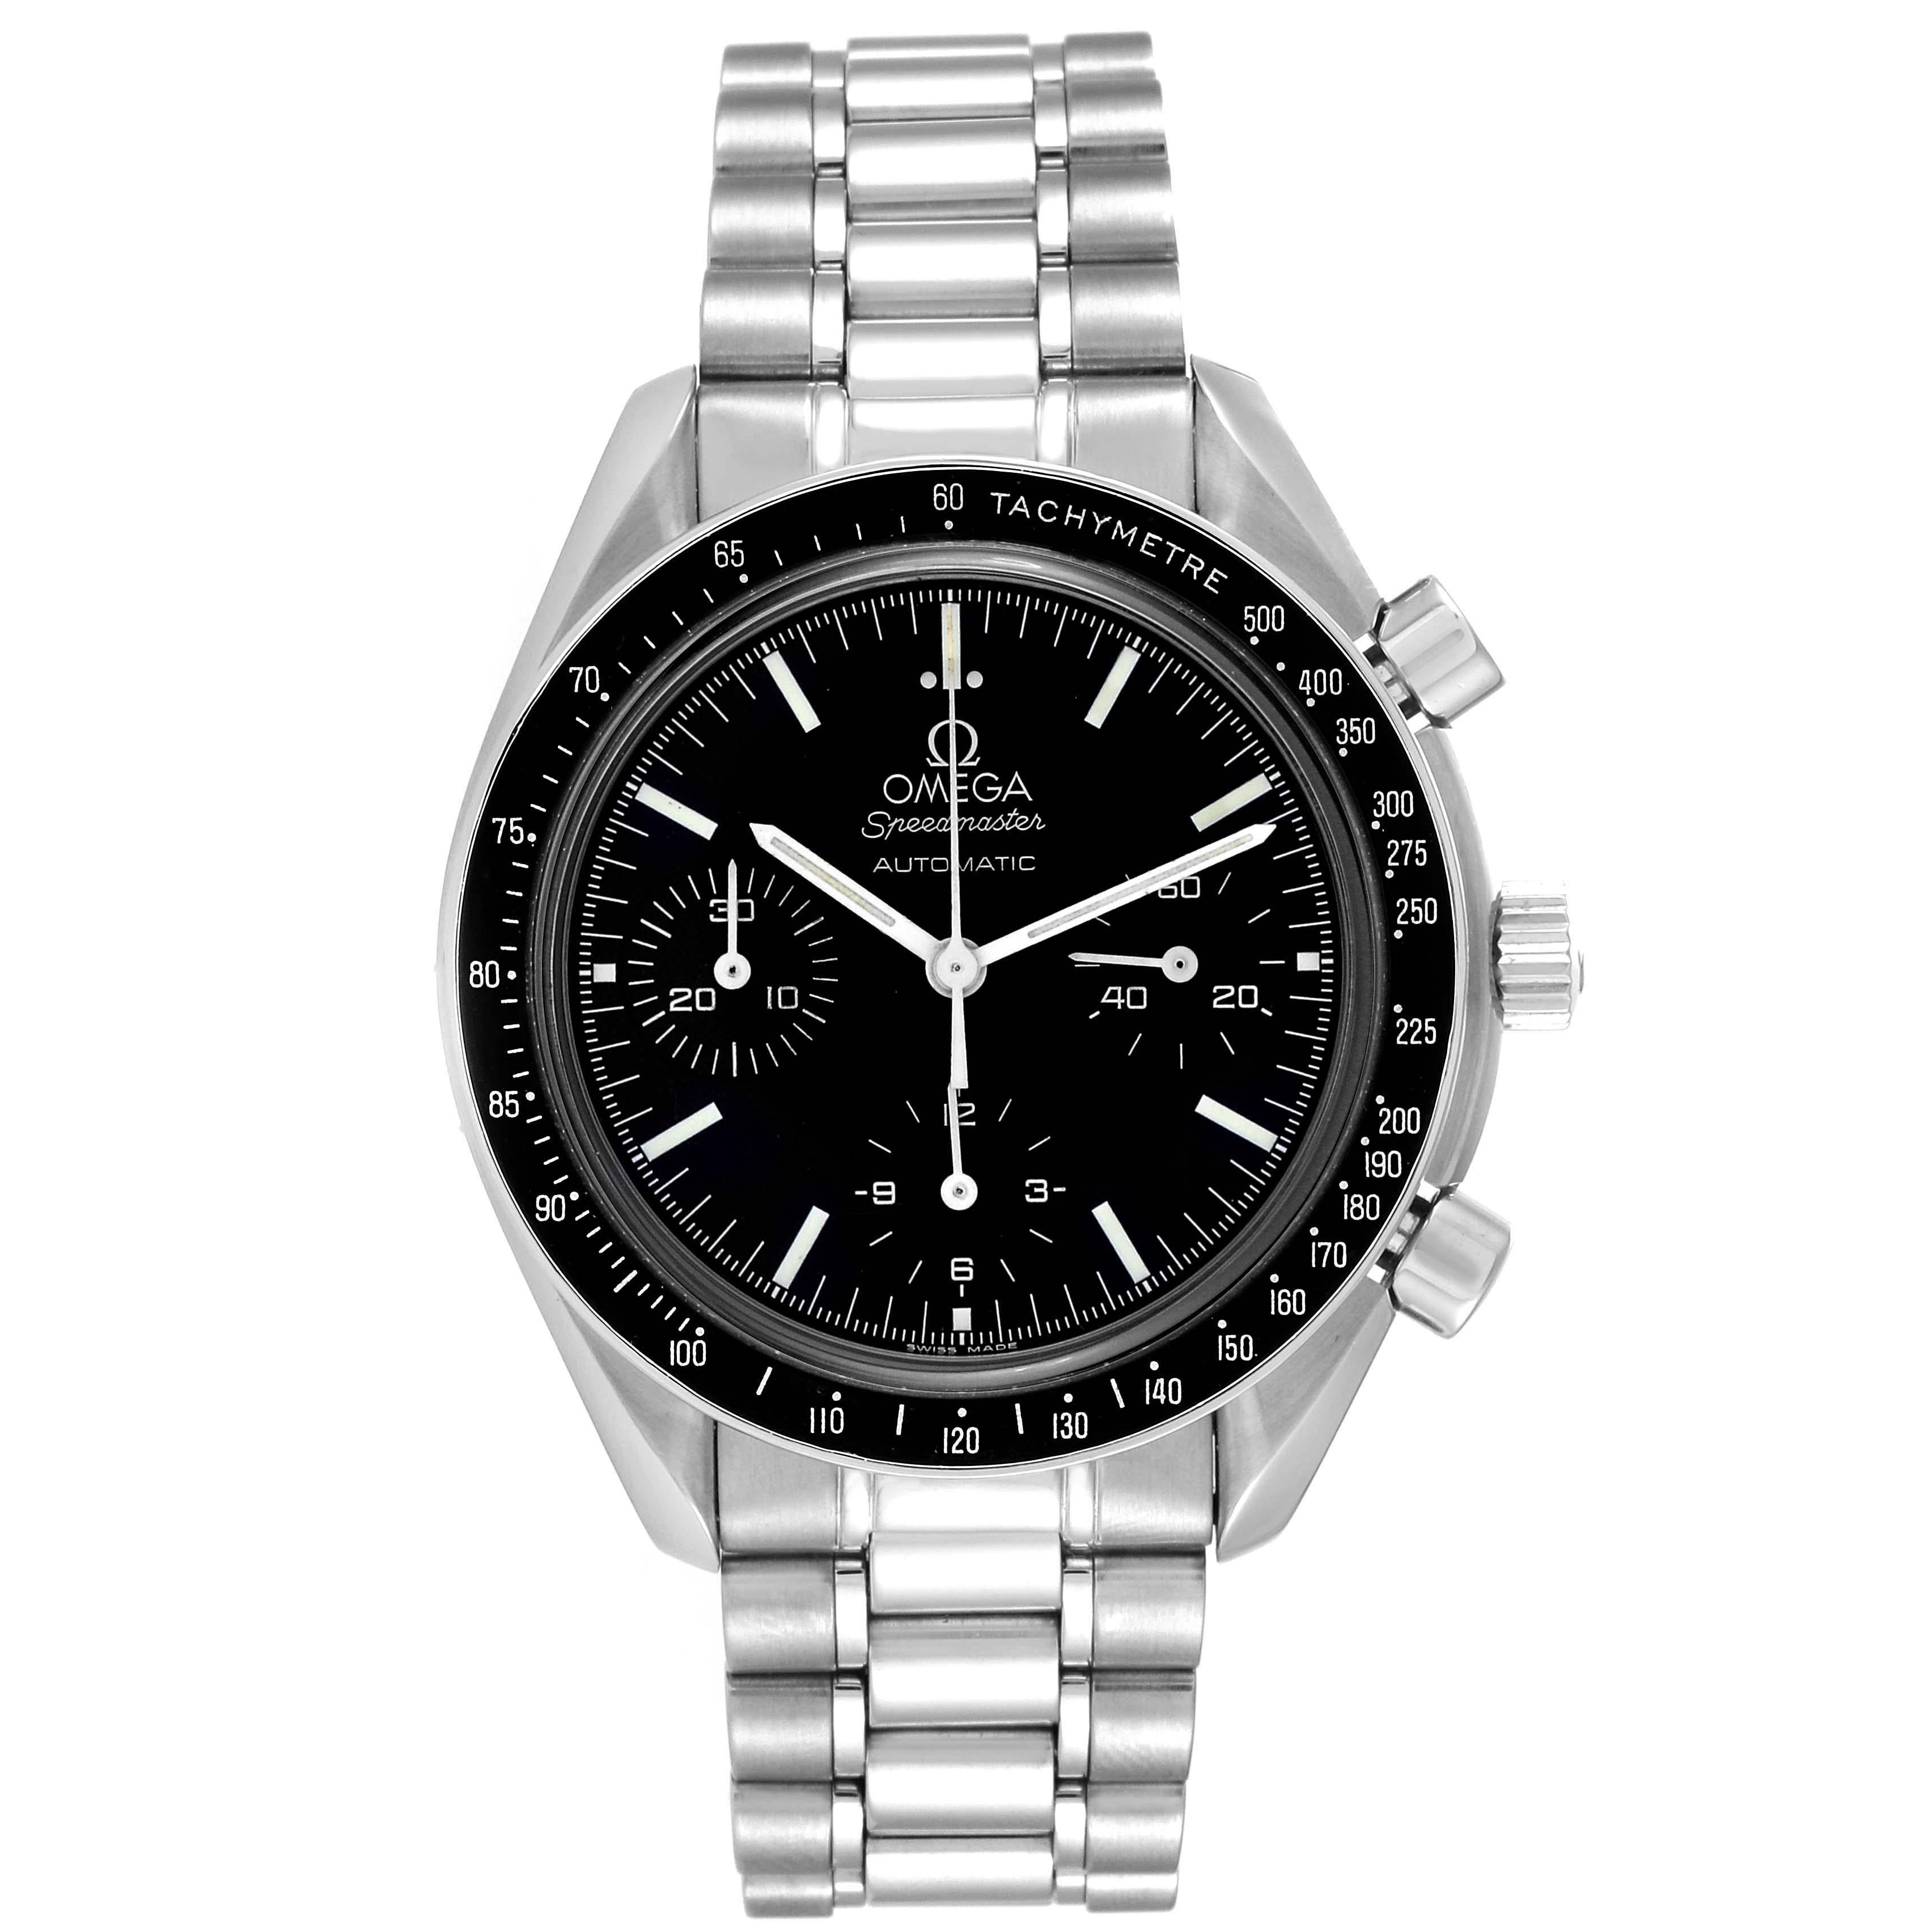 Omega Speedmaster Reduced Chronograph Steel Mens Watch 3539.50.00. Automatic self-winding chronograph movement. Stainless steel round case 39.0 mm in diameter. Black bezel with tachymeter function. Scratch resistant sapphire crystal. Black dial with